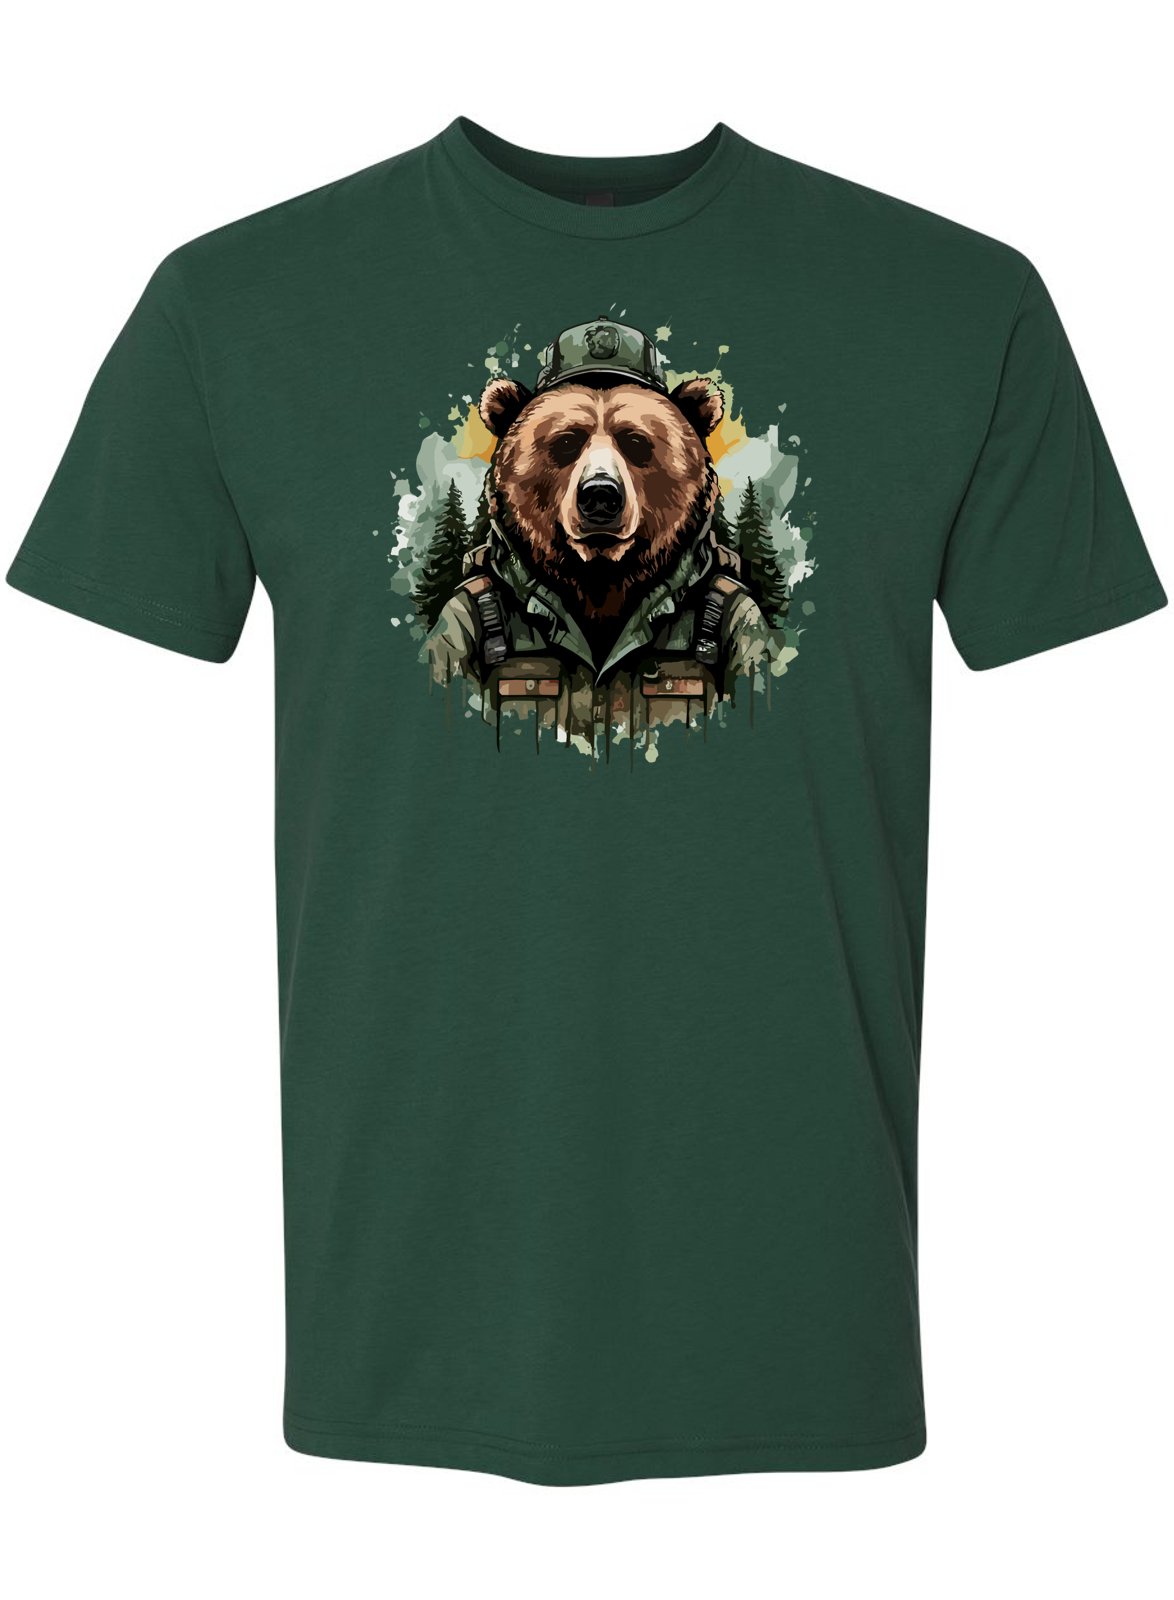 Embrace Nature's Guardian: Forest Ranger Bear T-shirts | Explore Wilderness in Style! -